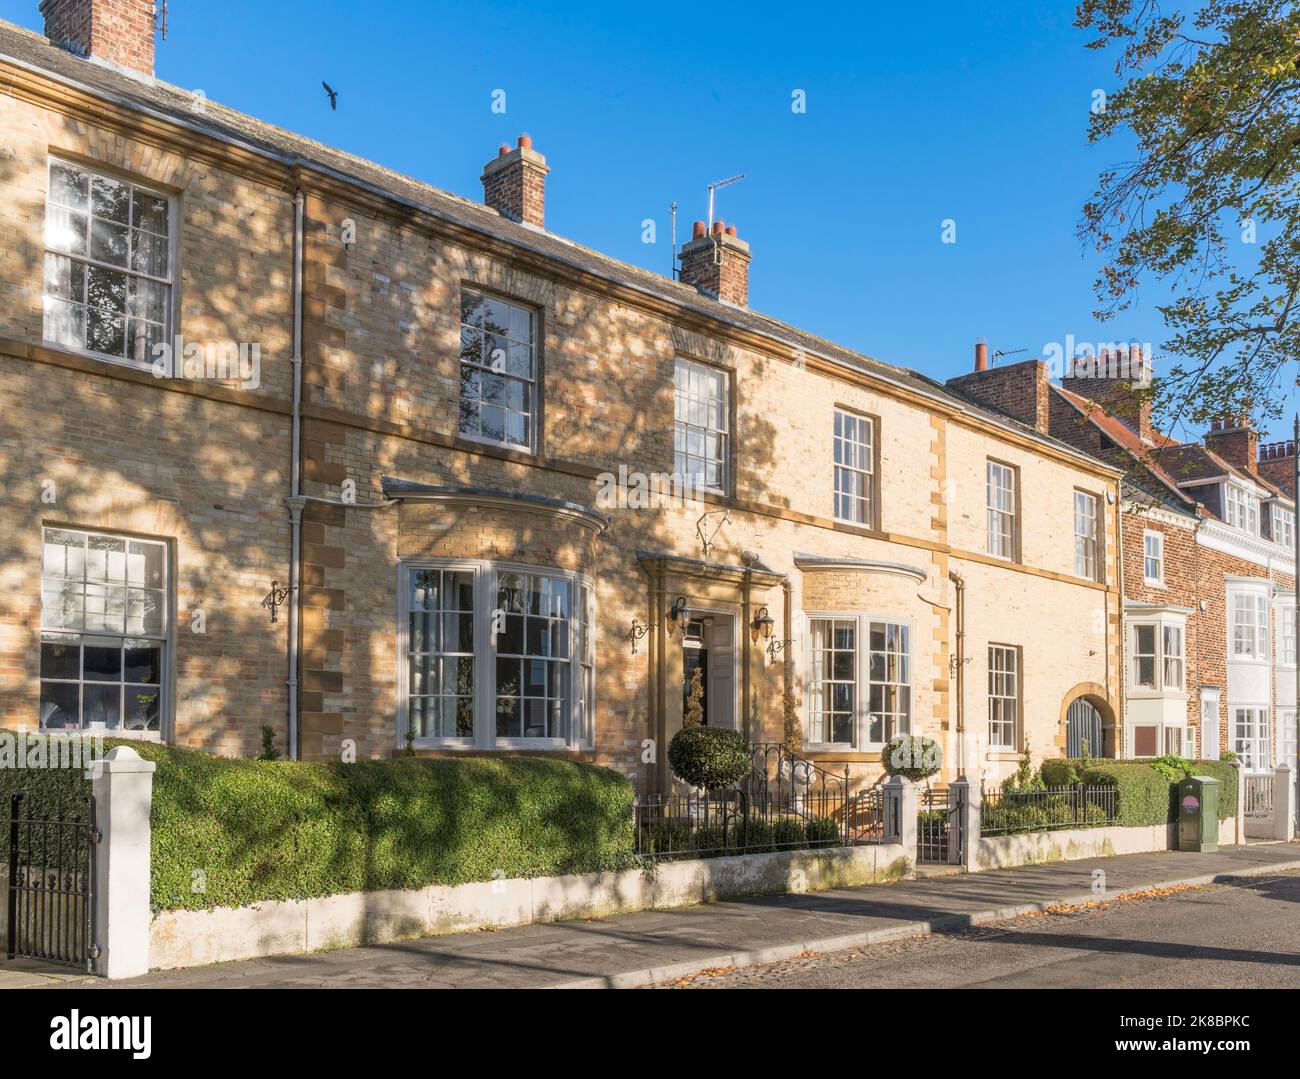 The Listed Stokesley House, 2 West Green, Stokesley North Yorkshire, Inglaterra, Reino Unido, Foto de stock